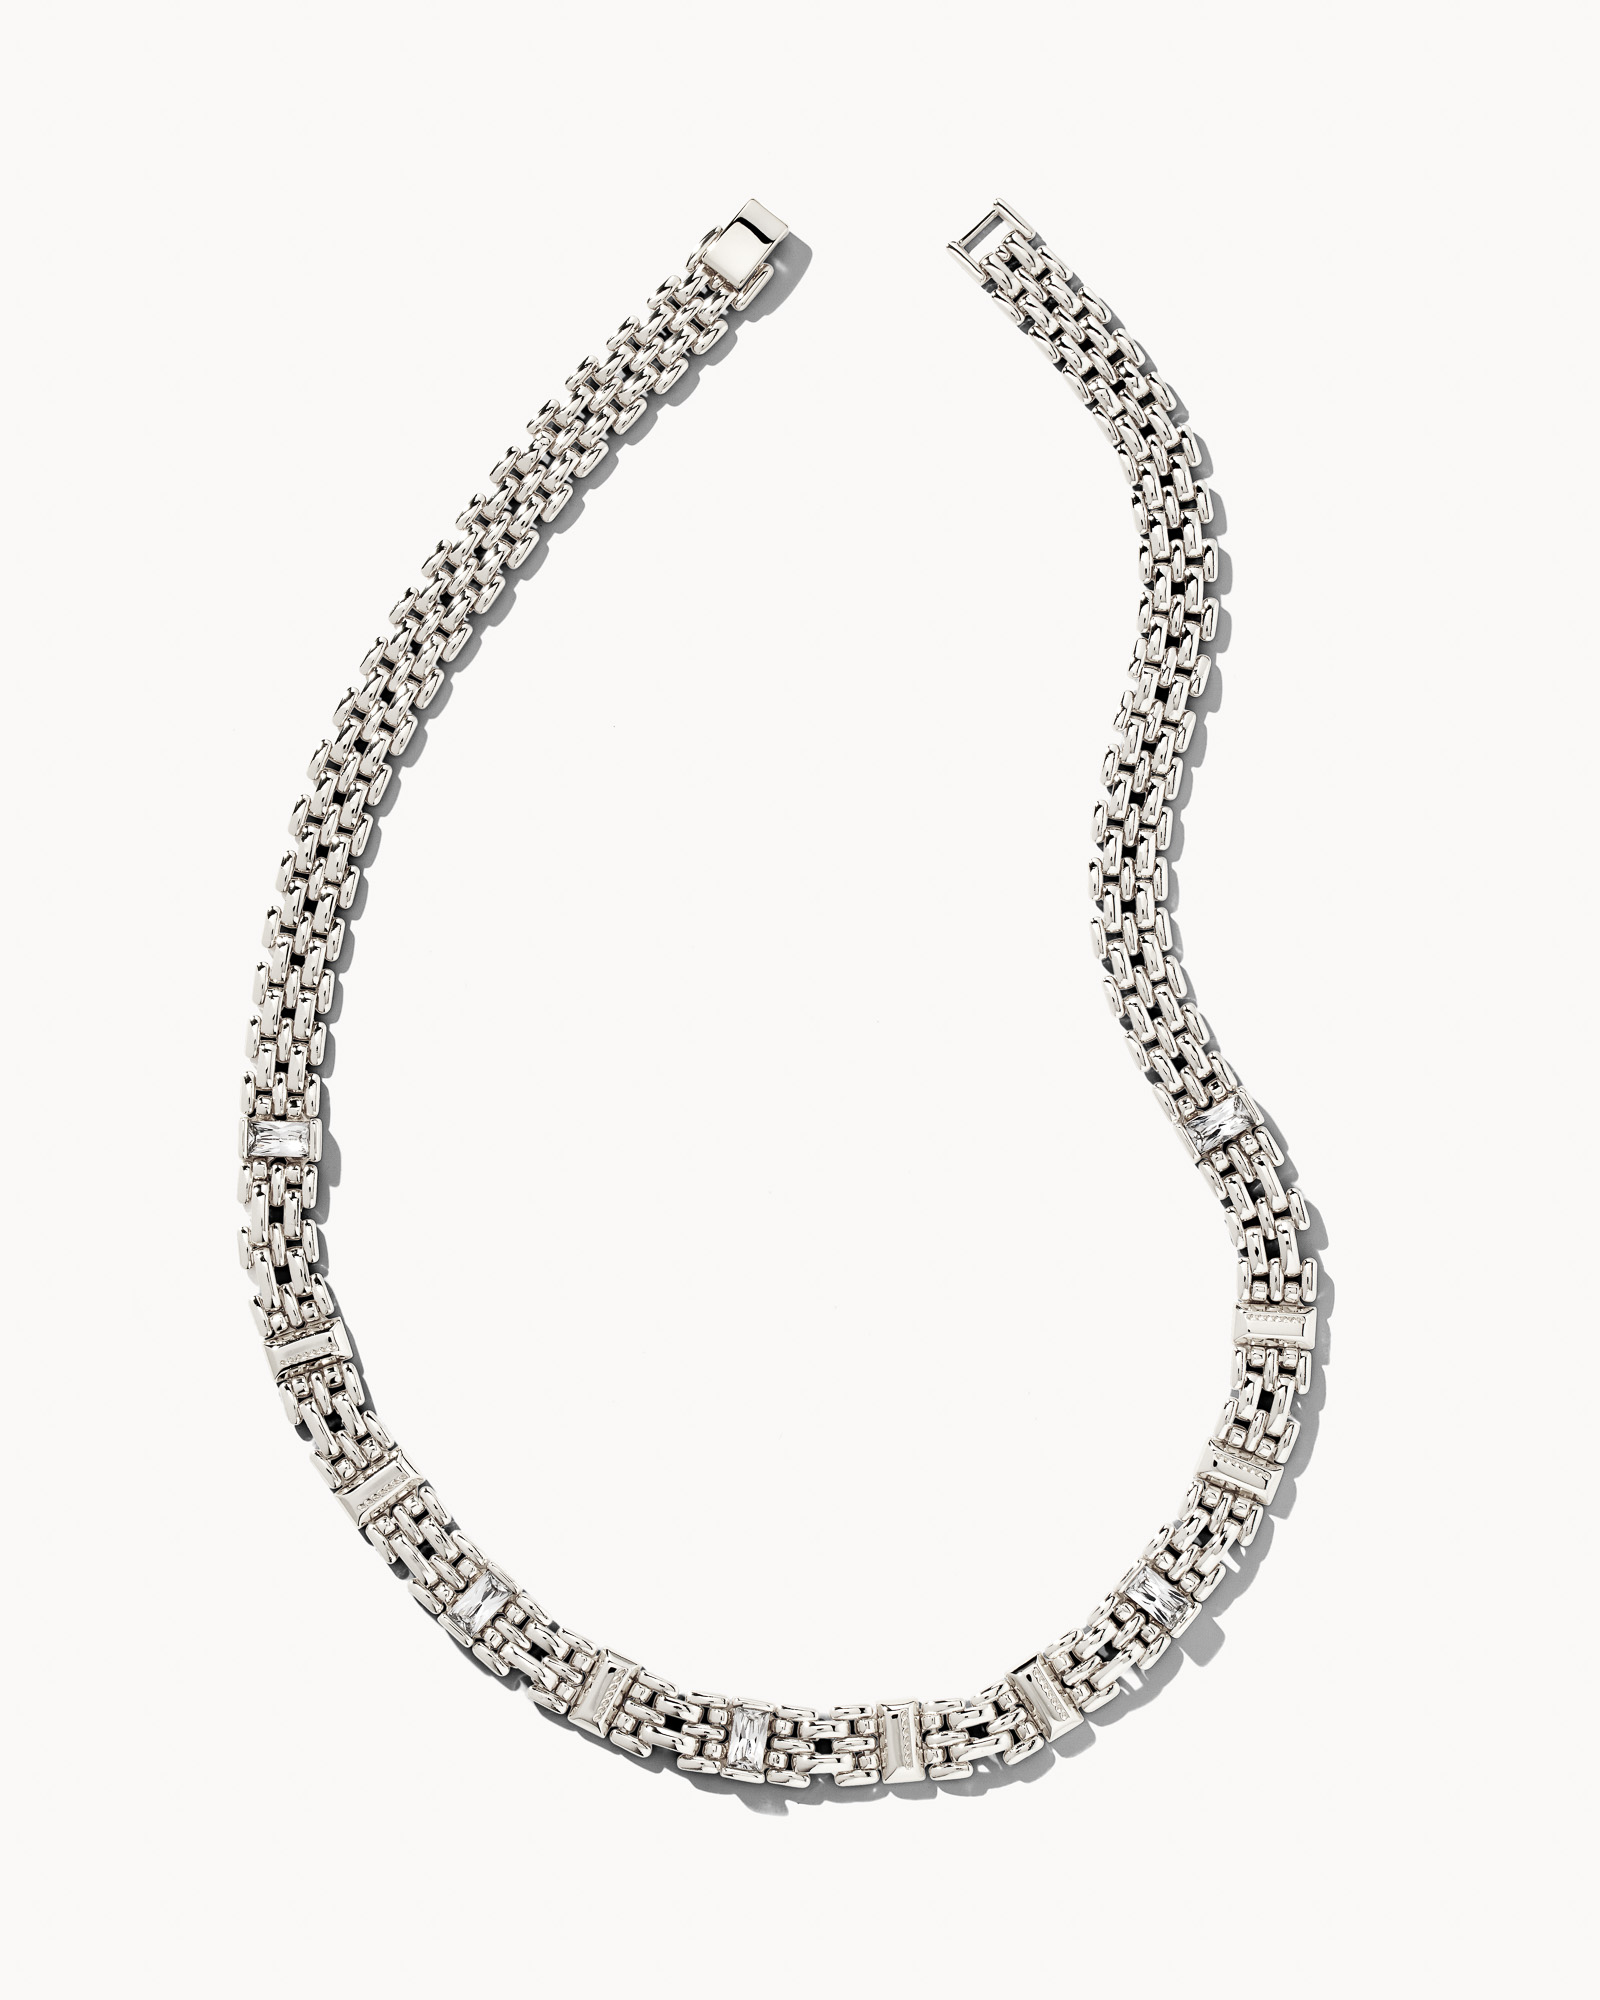 Lesley Chain Necklace in Silver | Kendra Scott